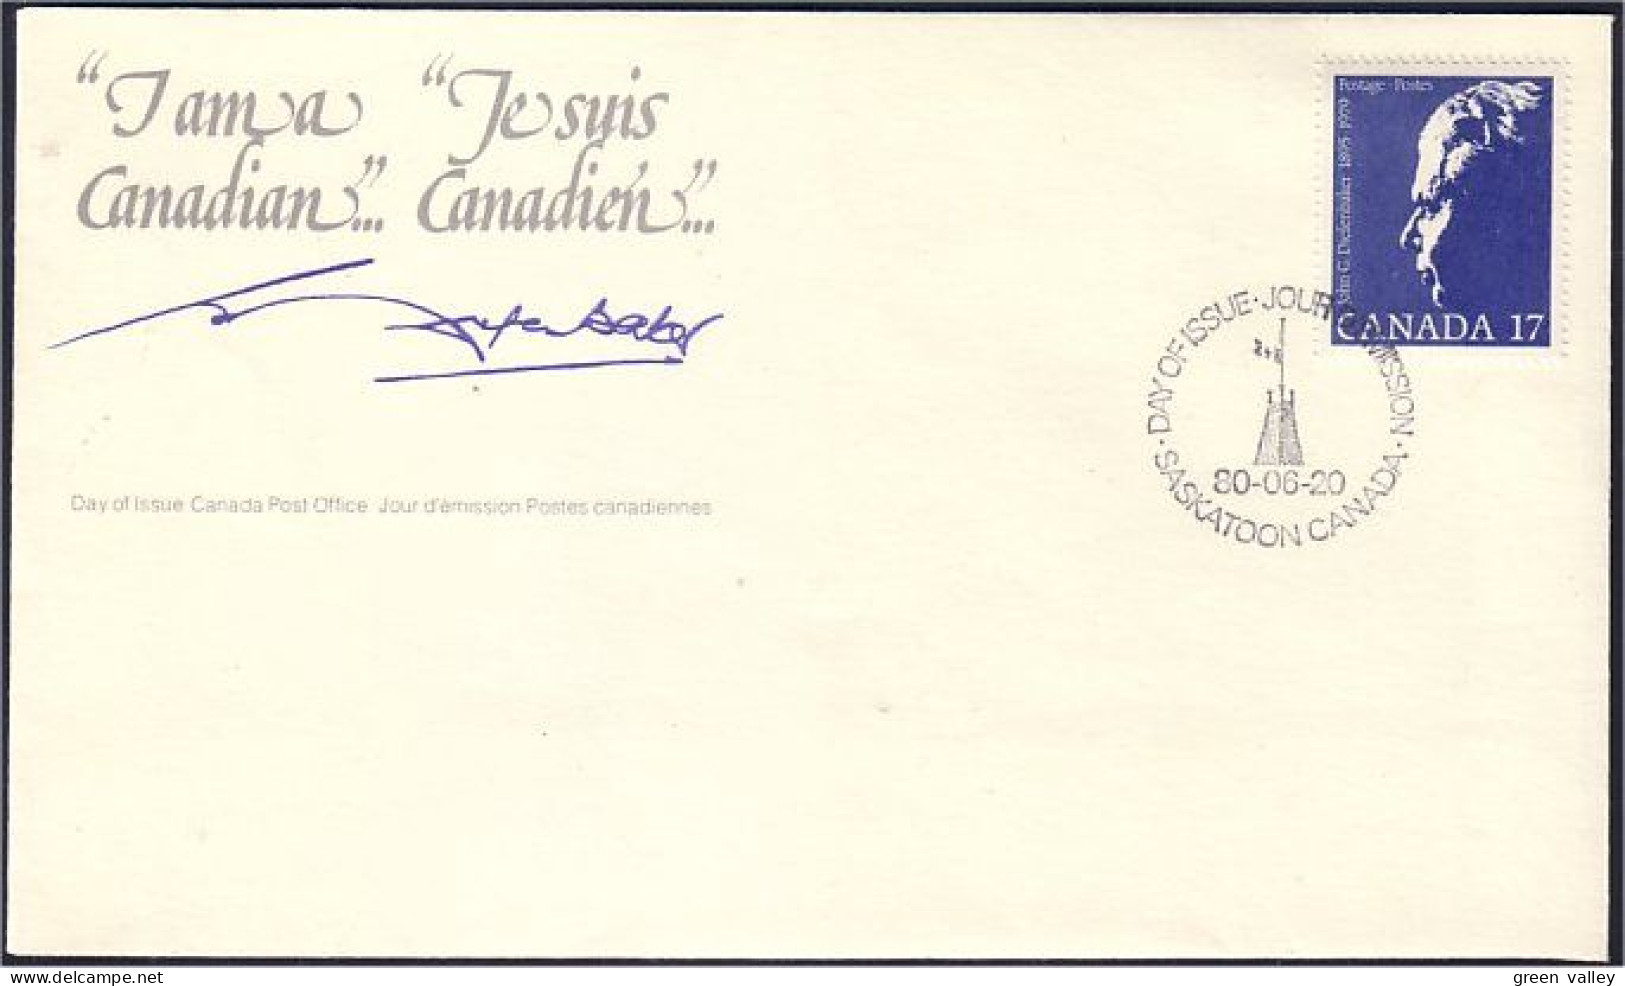 Canada Diefenbaker FDC Cover ( A72 307) - 1971-1980